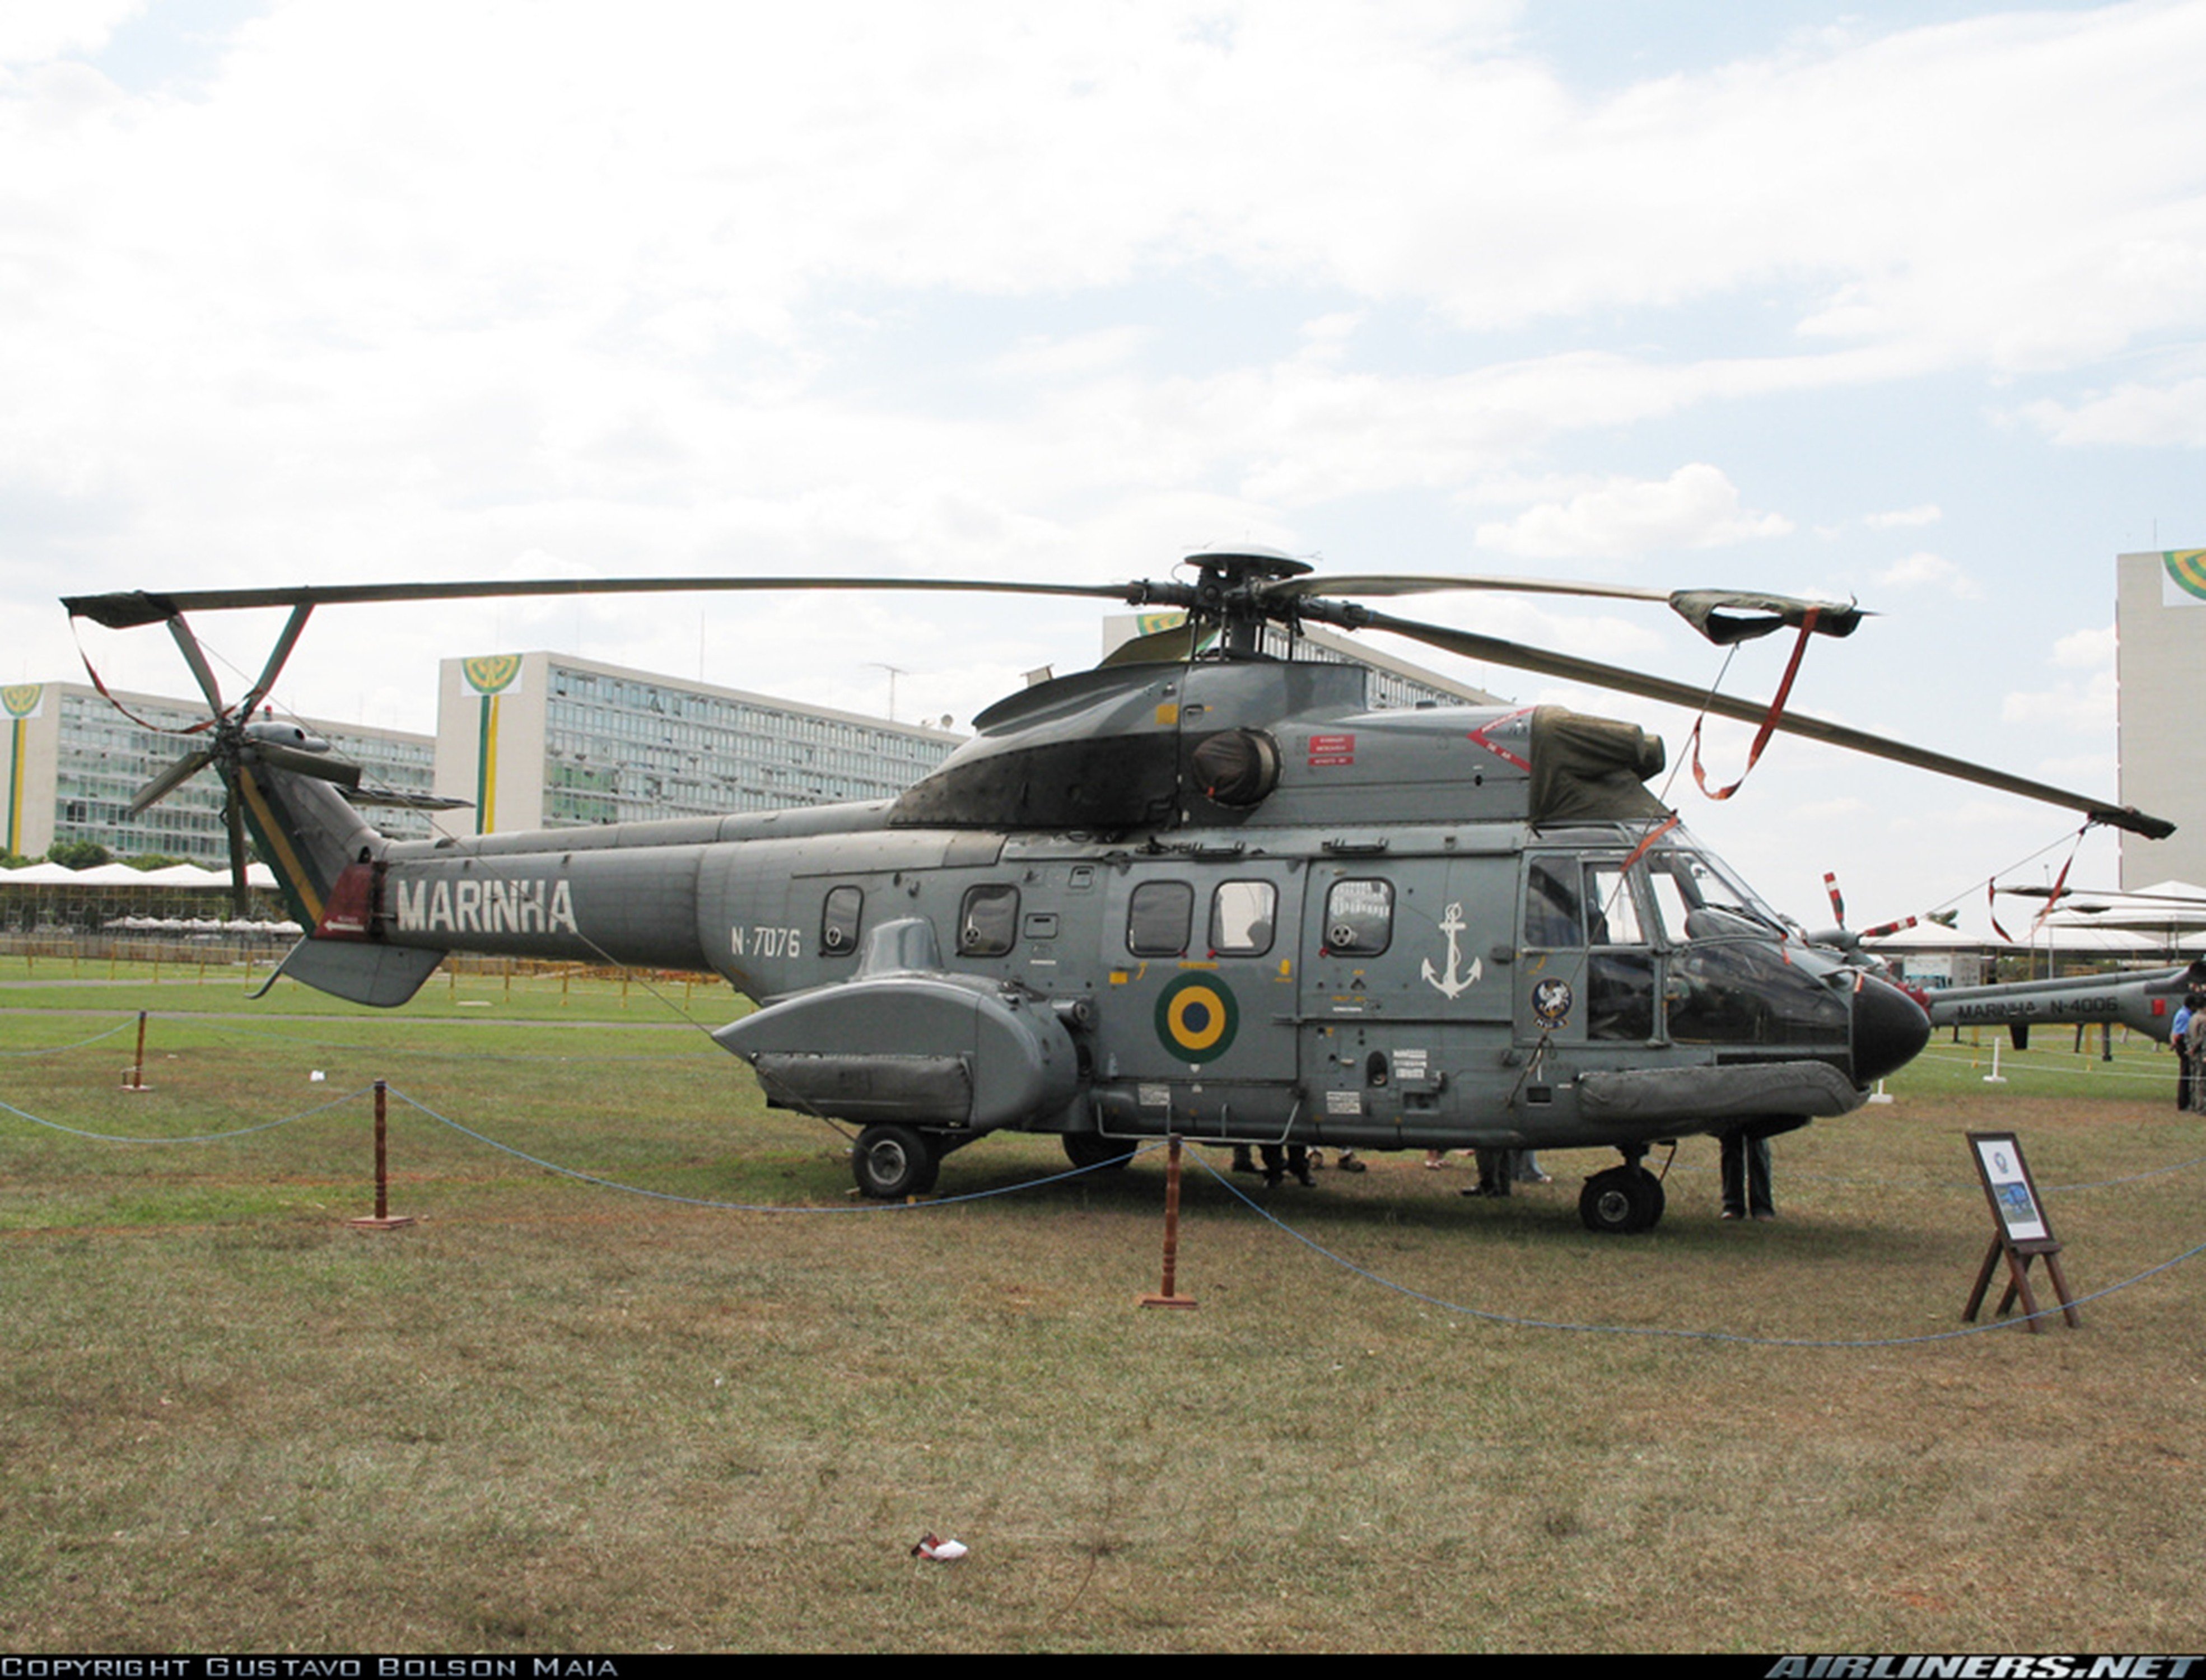 helicopter, Aircraft, Transport, Rescue, Military, Navy, Brazil, Super, Puma Wallpaper